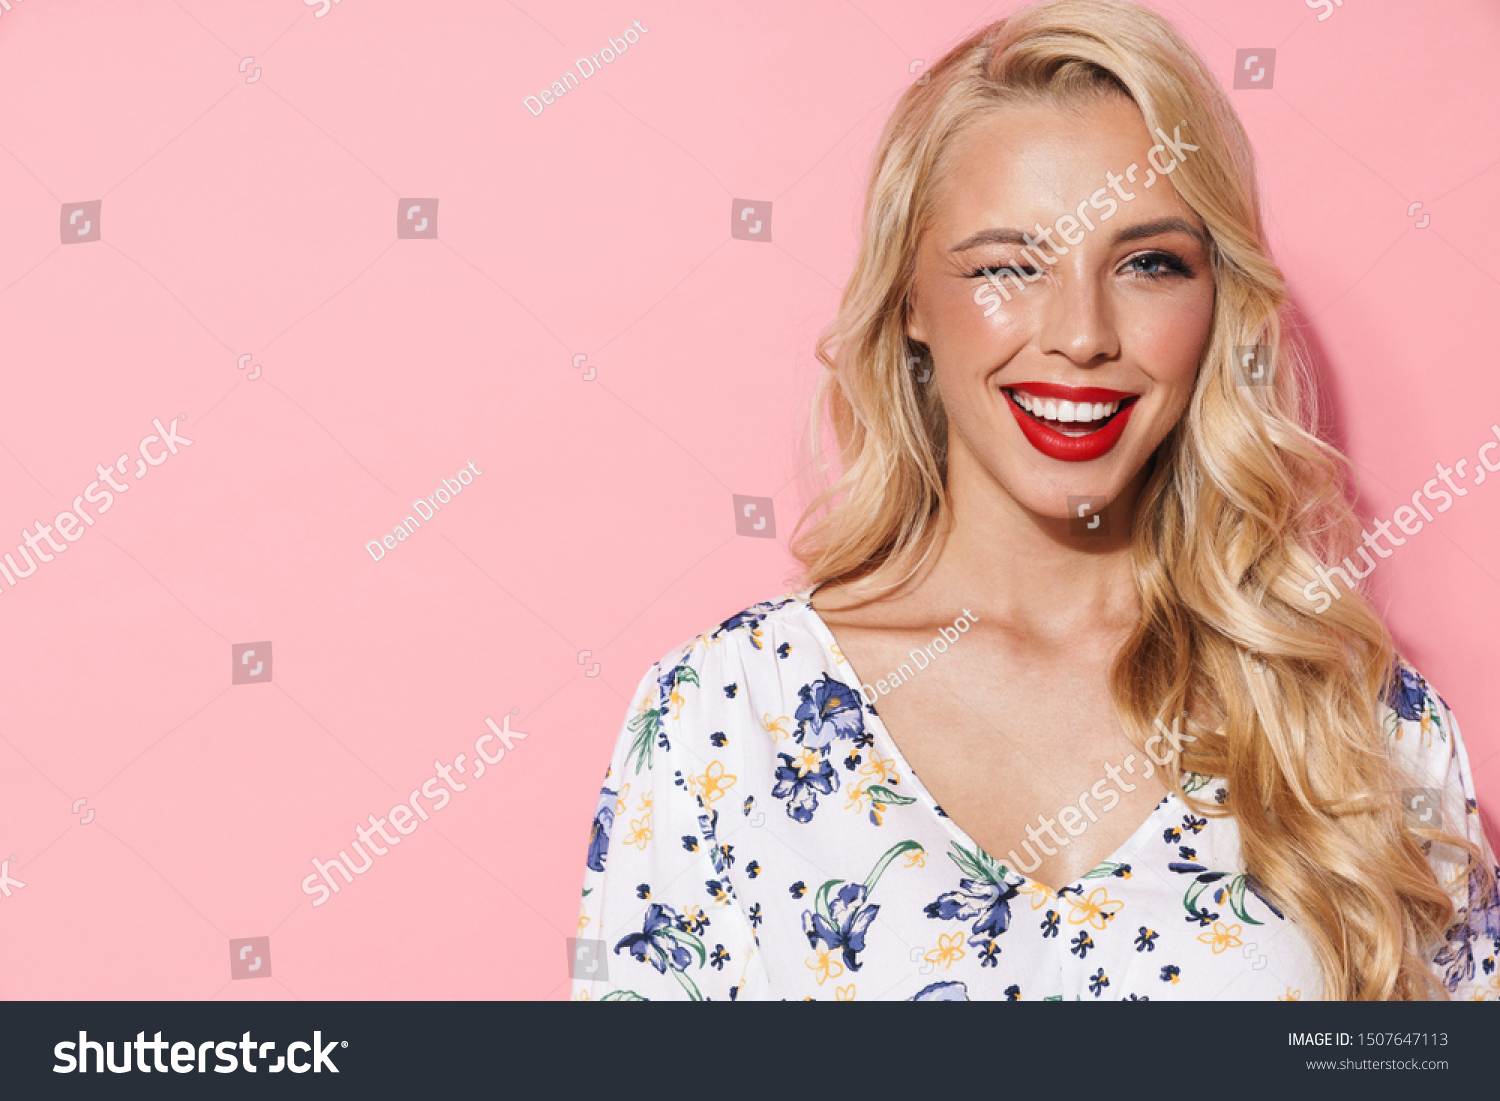 Image of gorgeous woman with long blond hair smiling and winking at camera isolated over pink background #1507647113